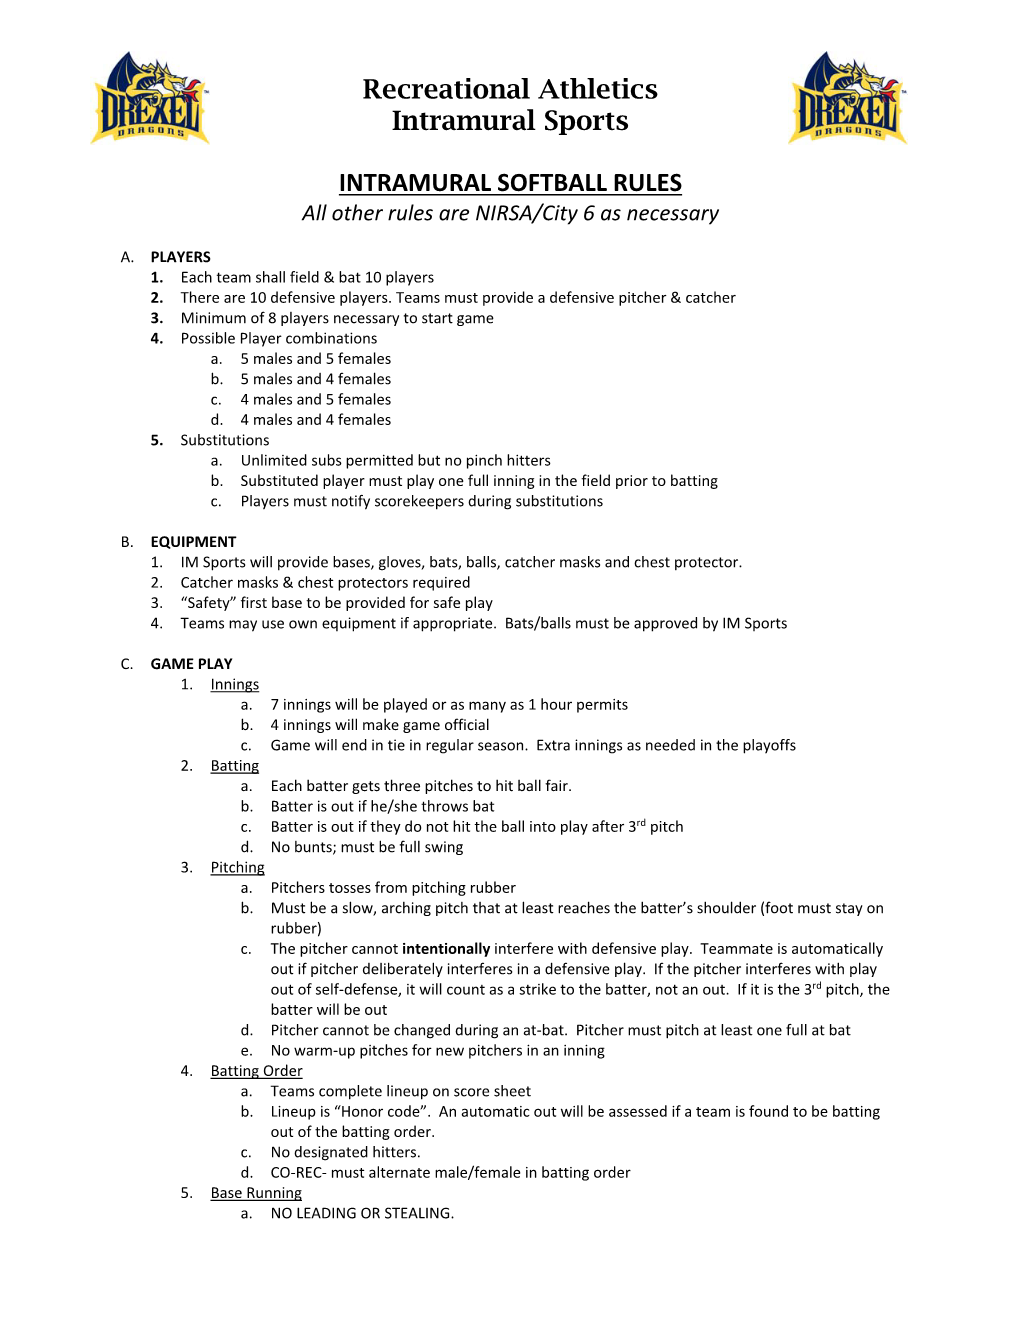 INTRAMURAL SOFTBALL RULES All Other Rules Are NIRSA/City 6 As Necessary